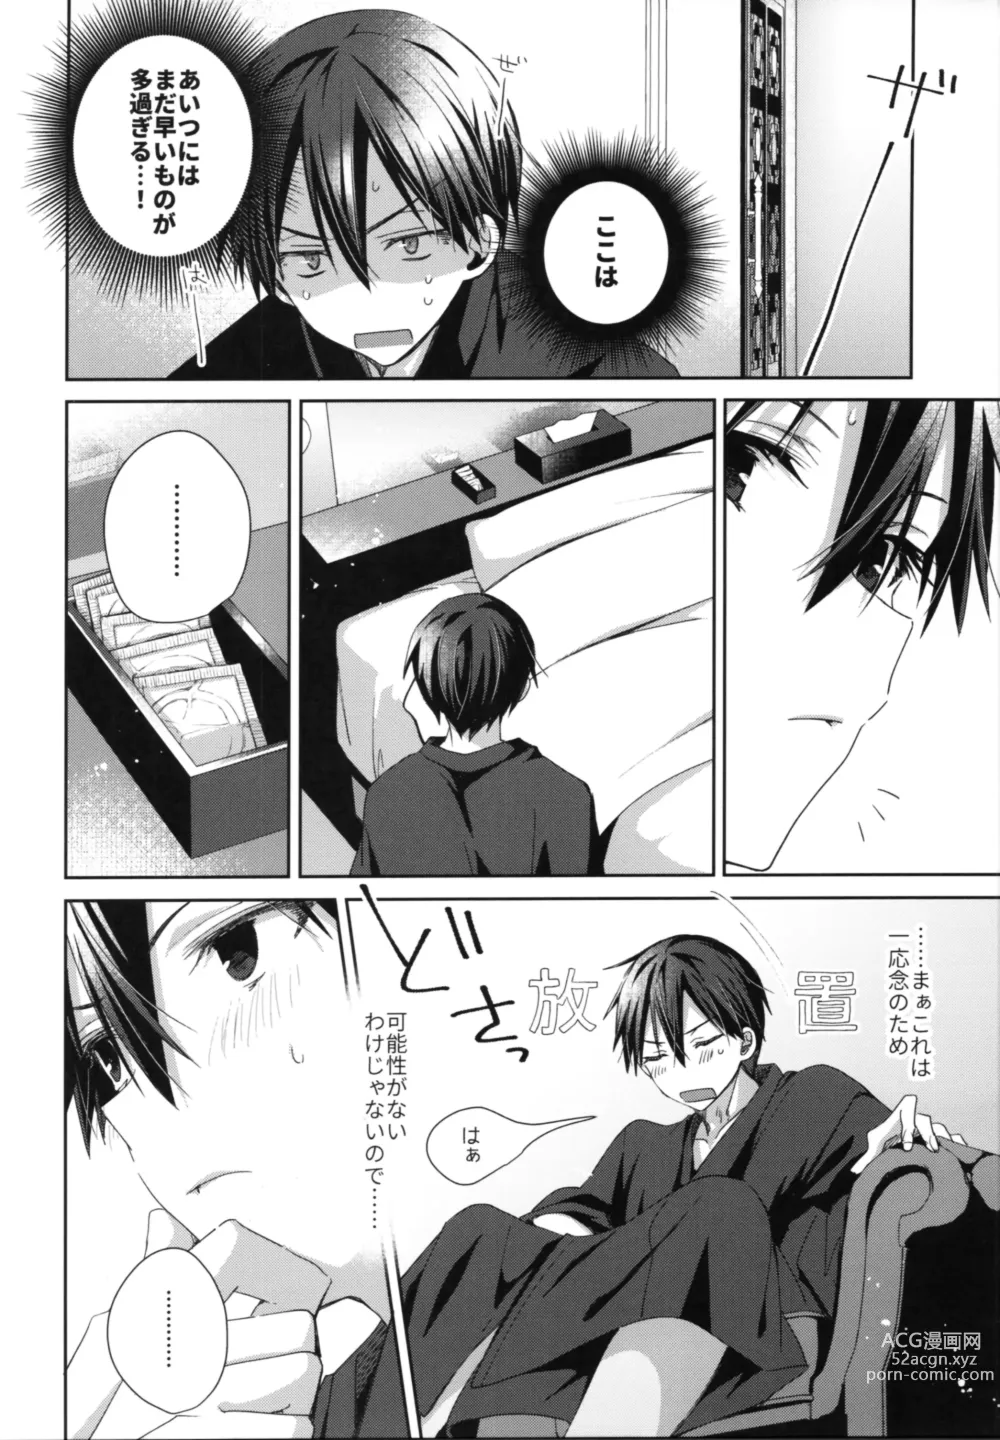 Page 9 of doujinshi Adolescent Summer